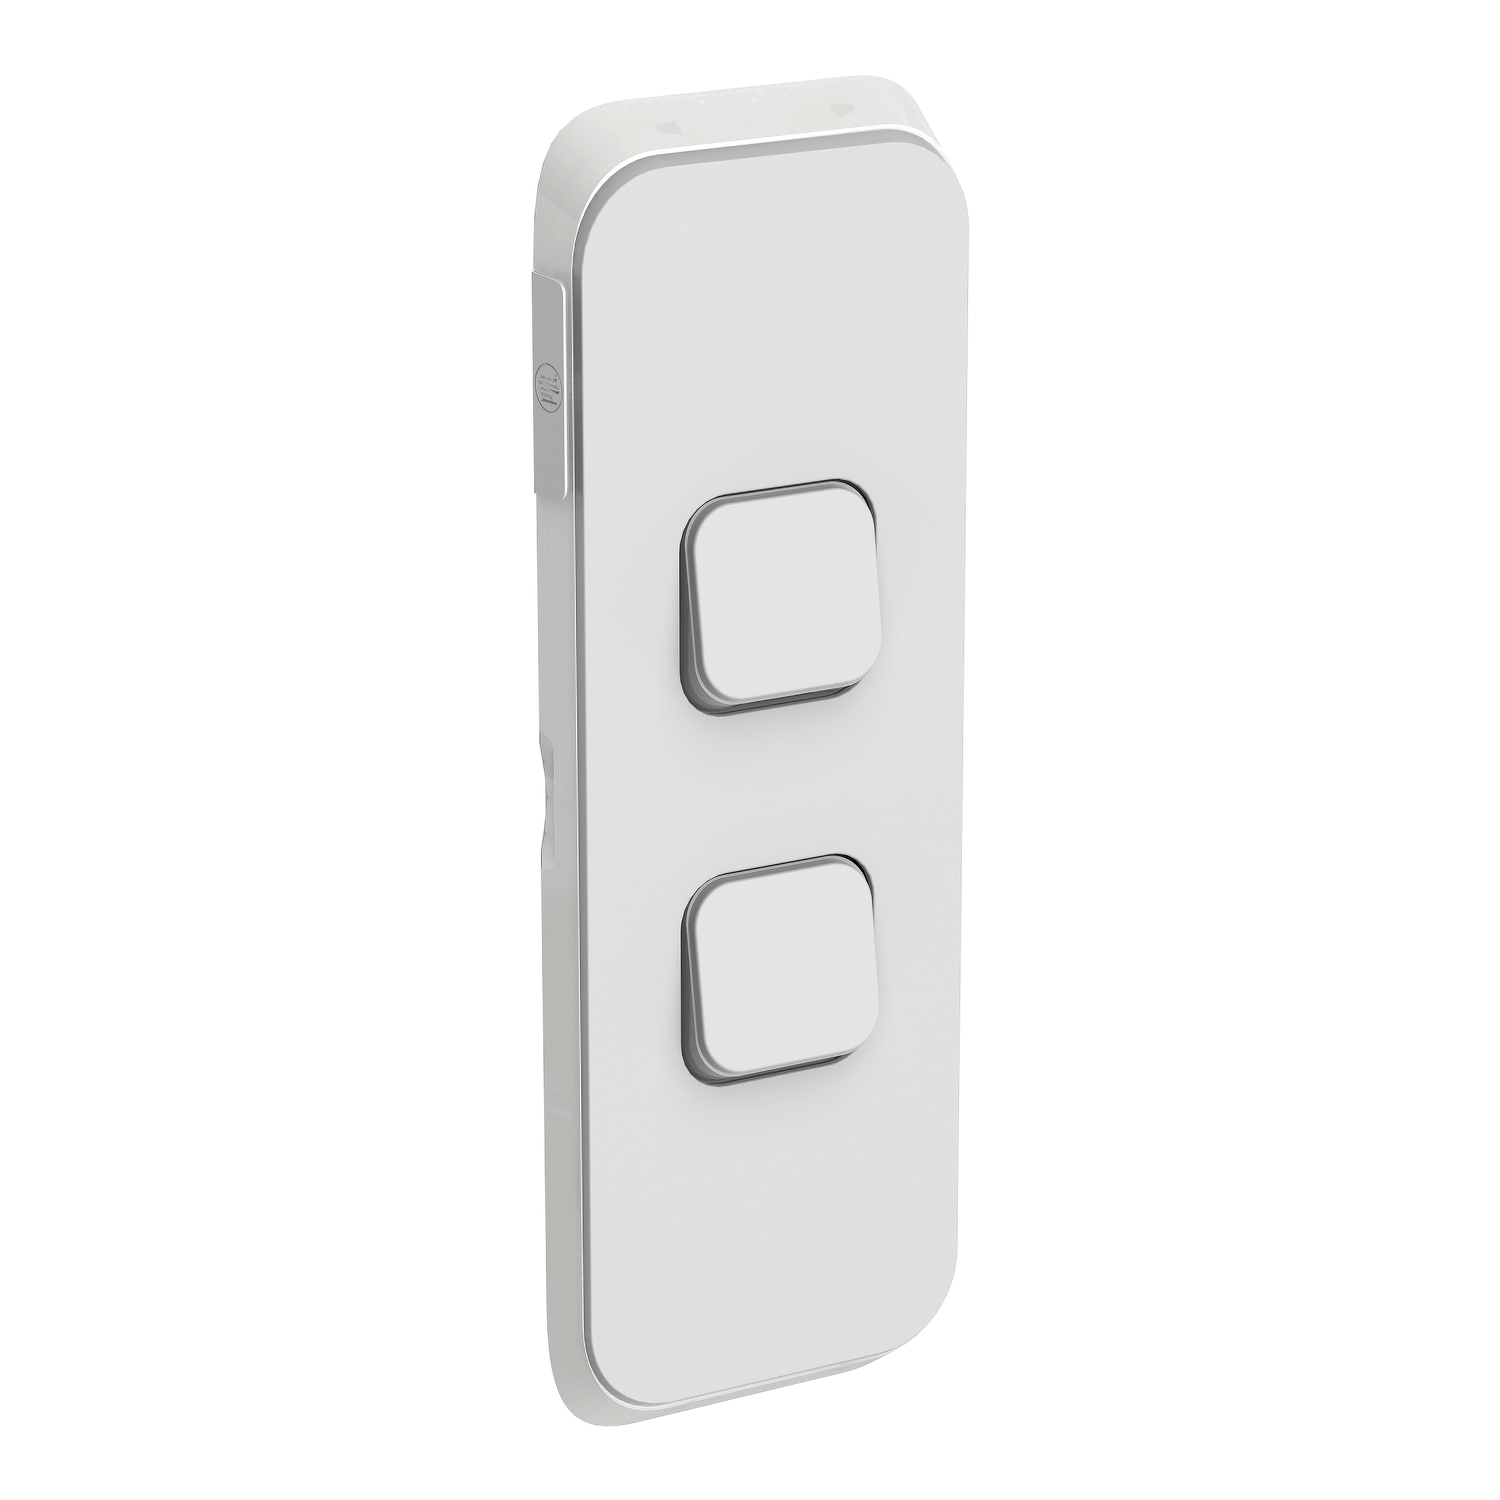 PDL Iconic - Cover Plate Switch Architrave 2-Gang - Cool Grey